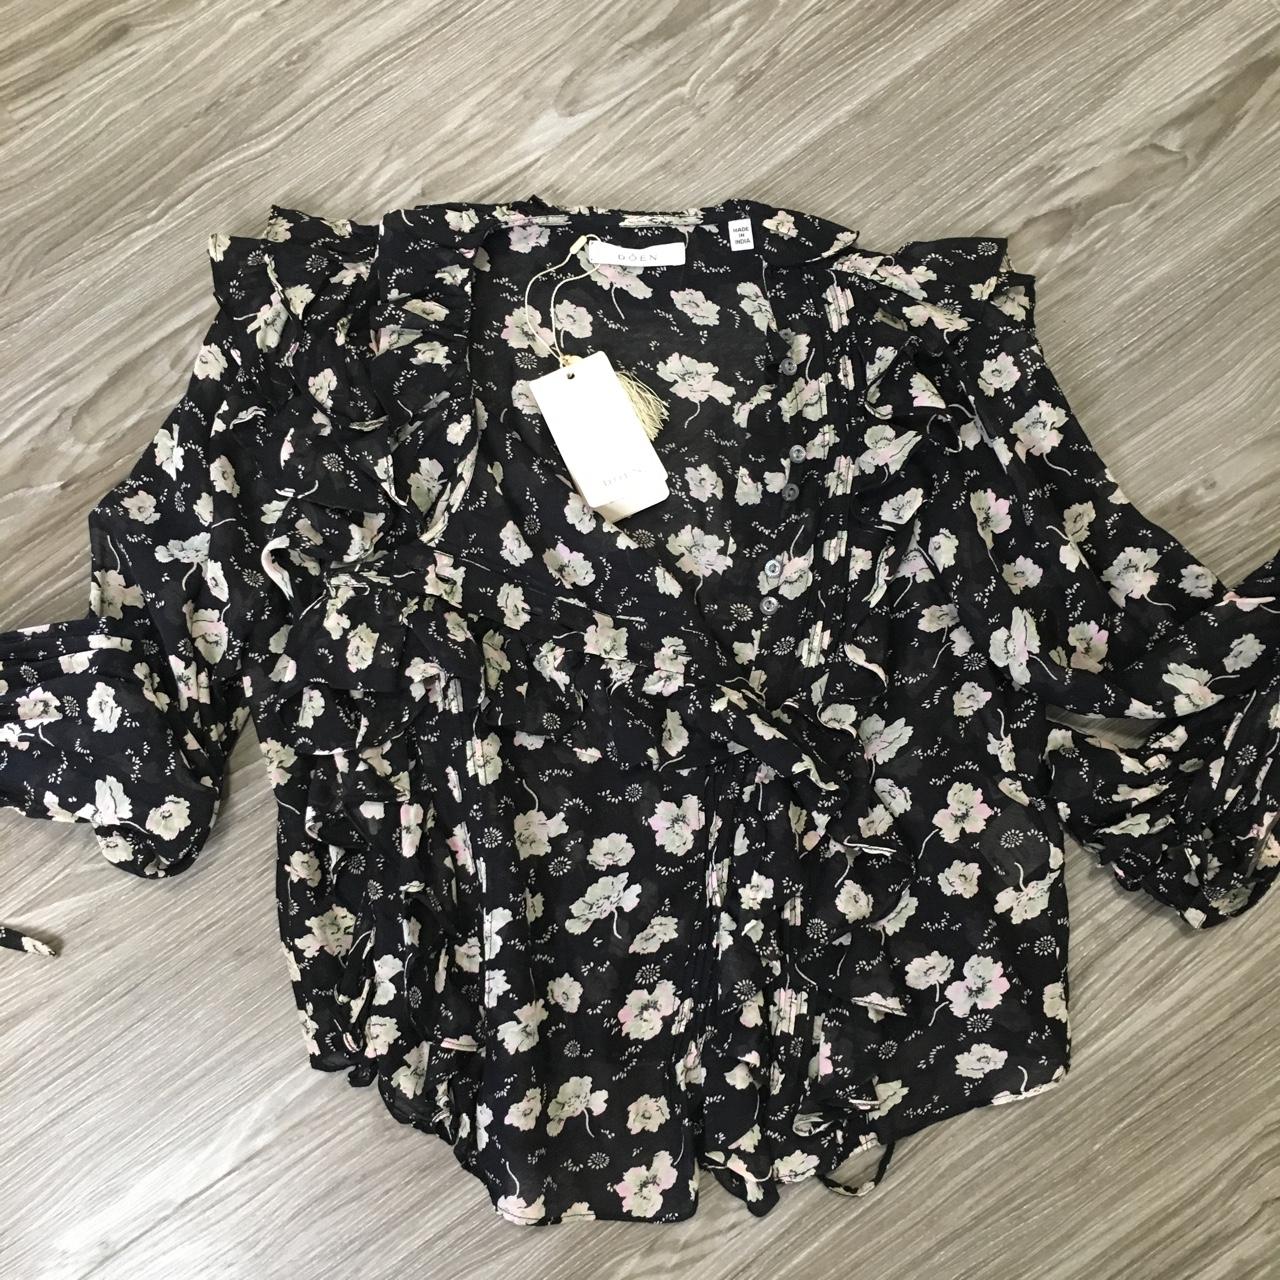 Product Image 2 - Doen Luca Blouse New With